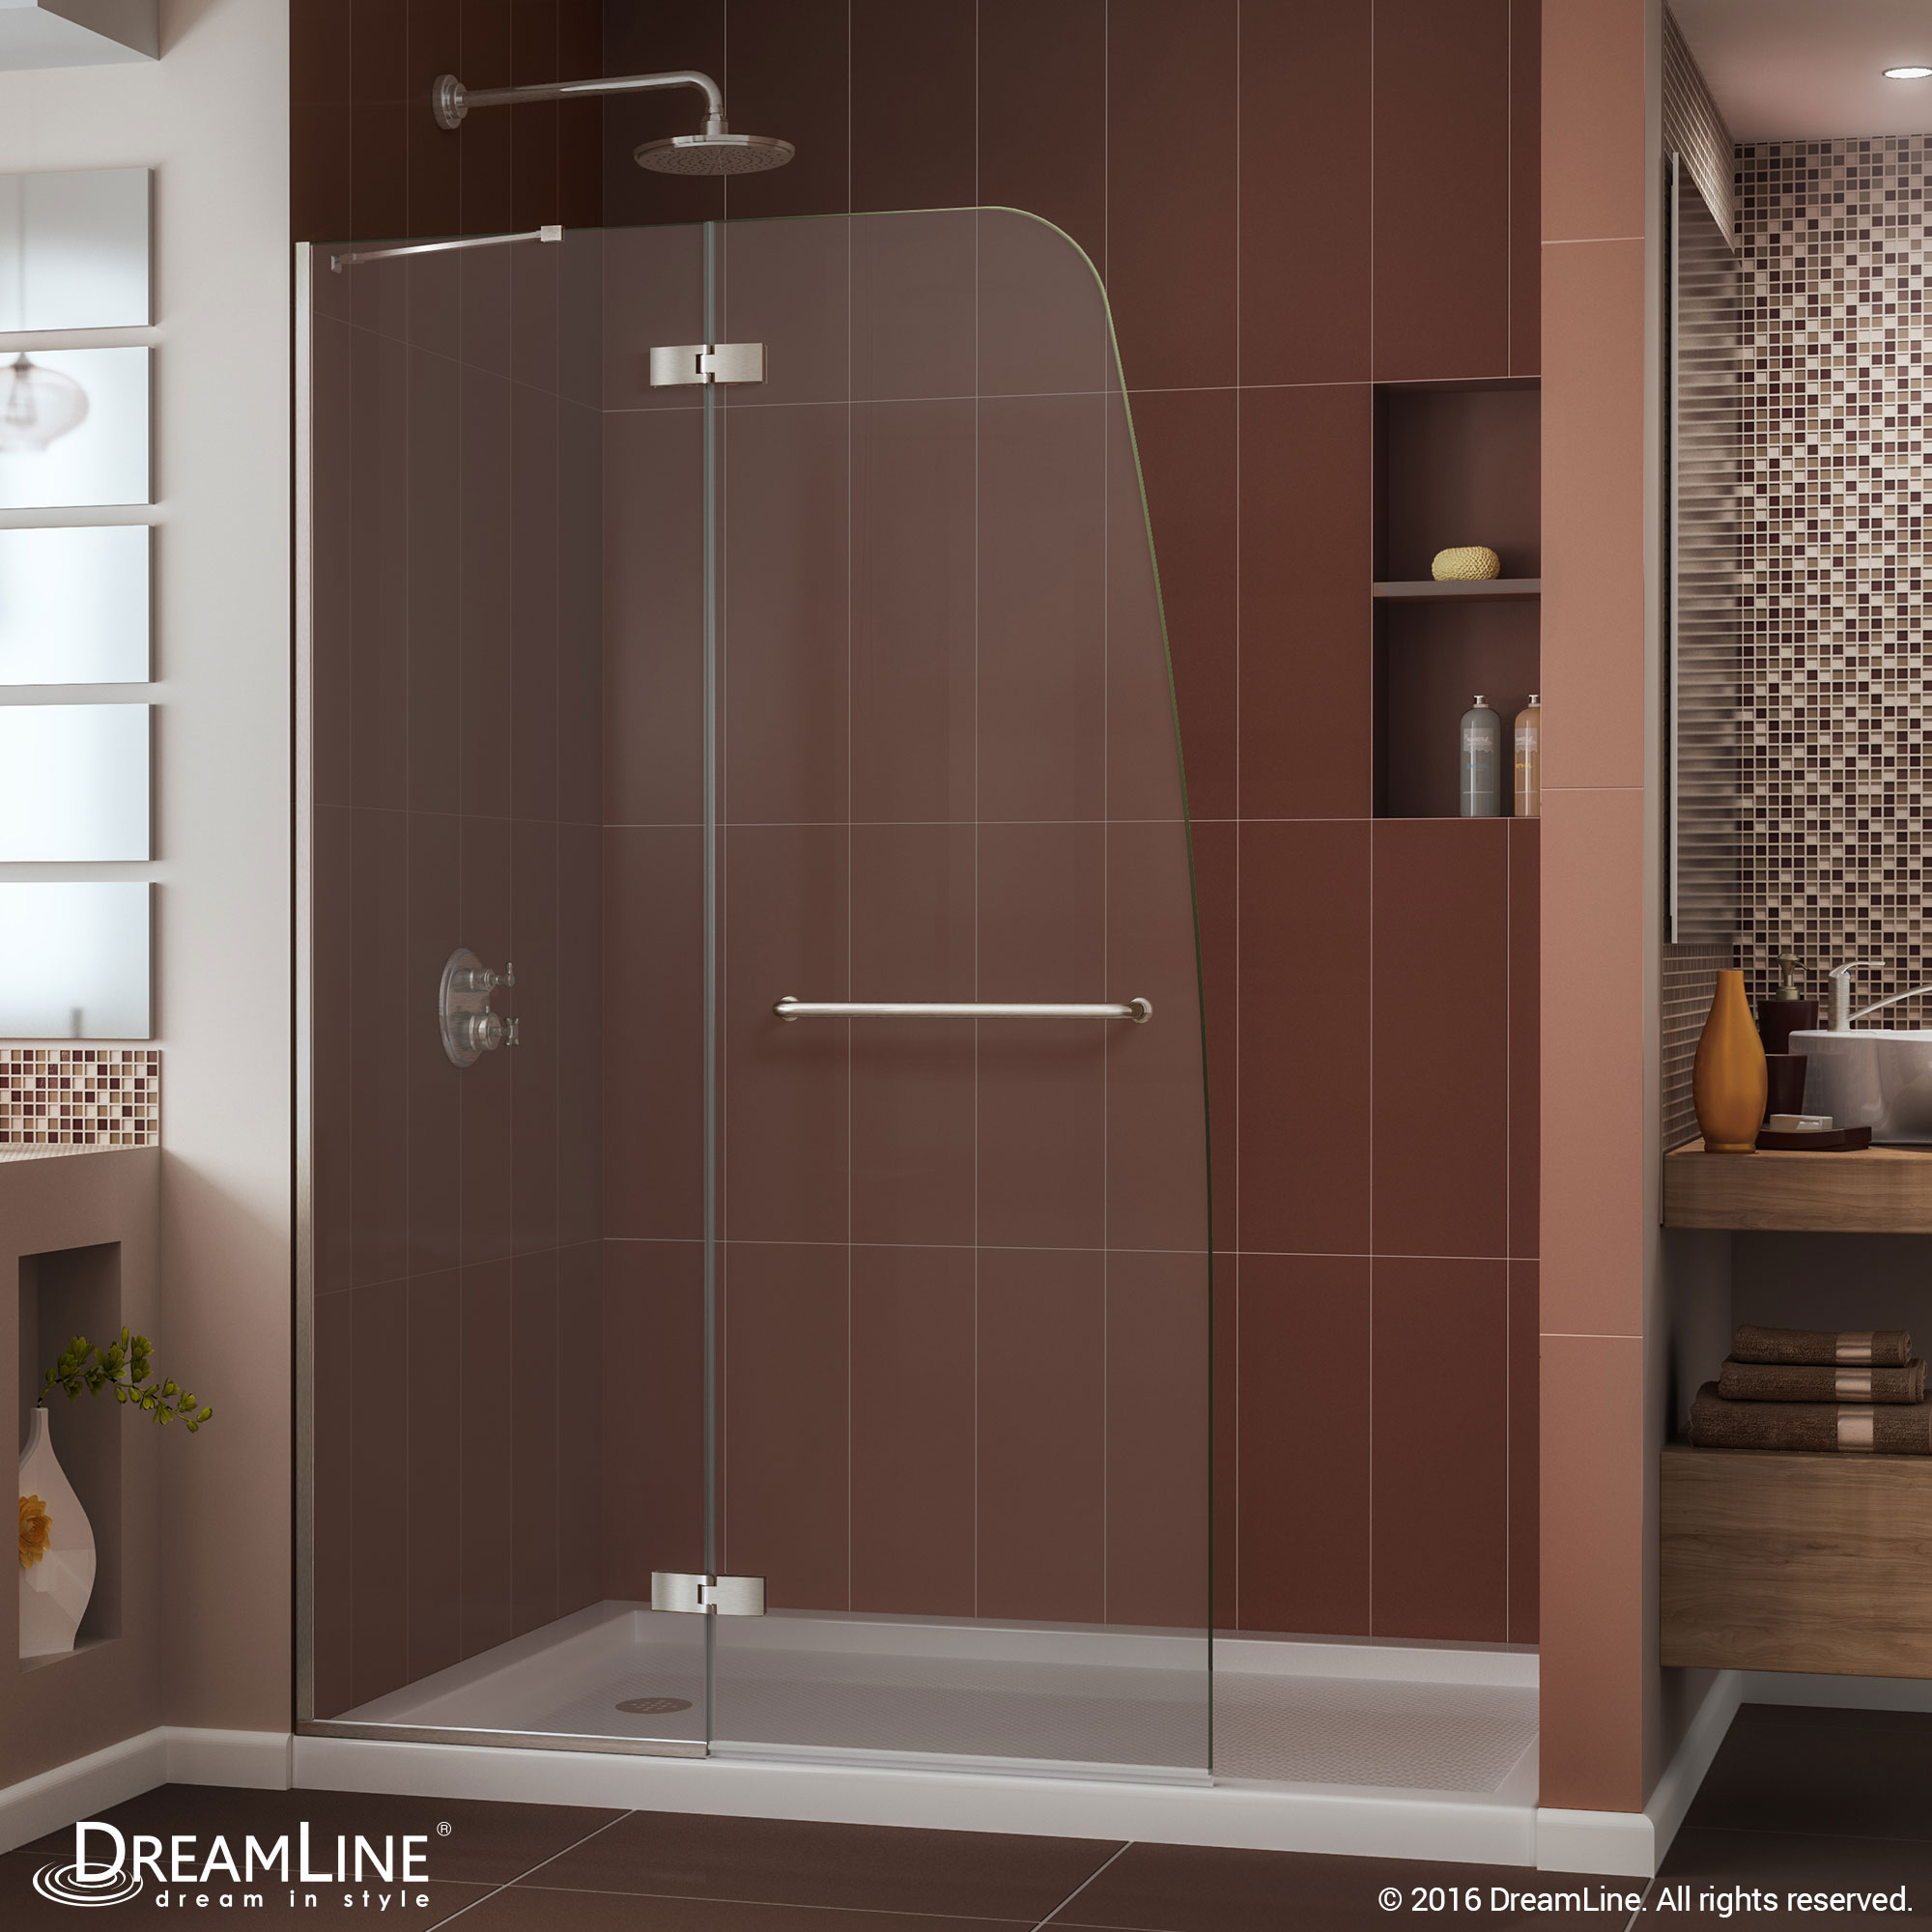 DreamLine Aqua Ultra 30 in. D x 60 in. W x 74 3/4 in. H Frameless Shower Door in Chrome and Left Drain Biscuit Base Kit